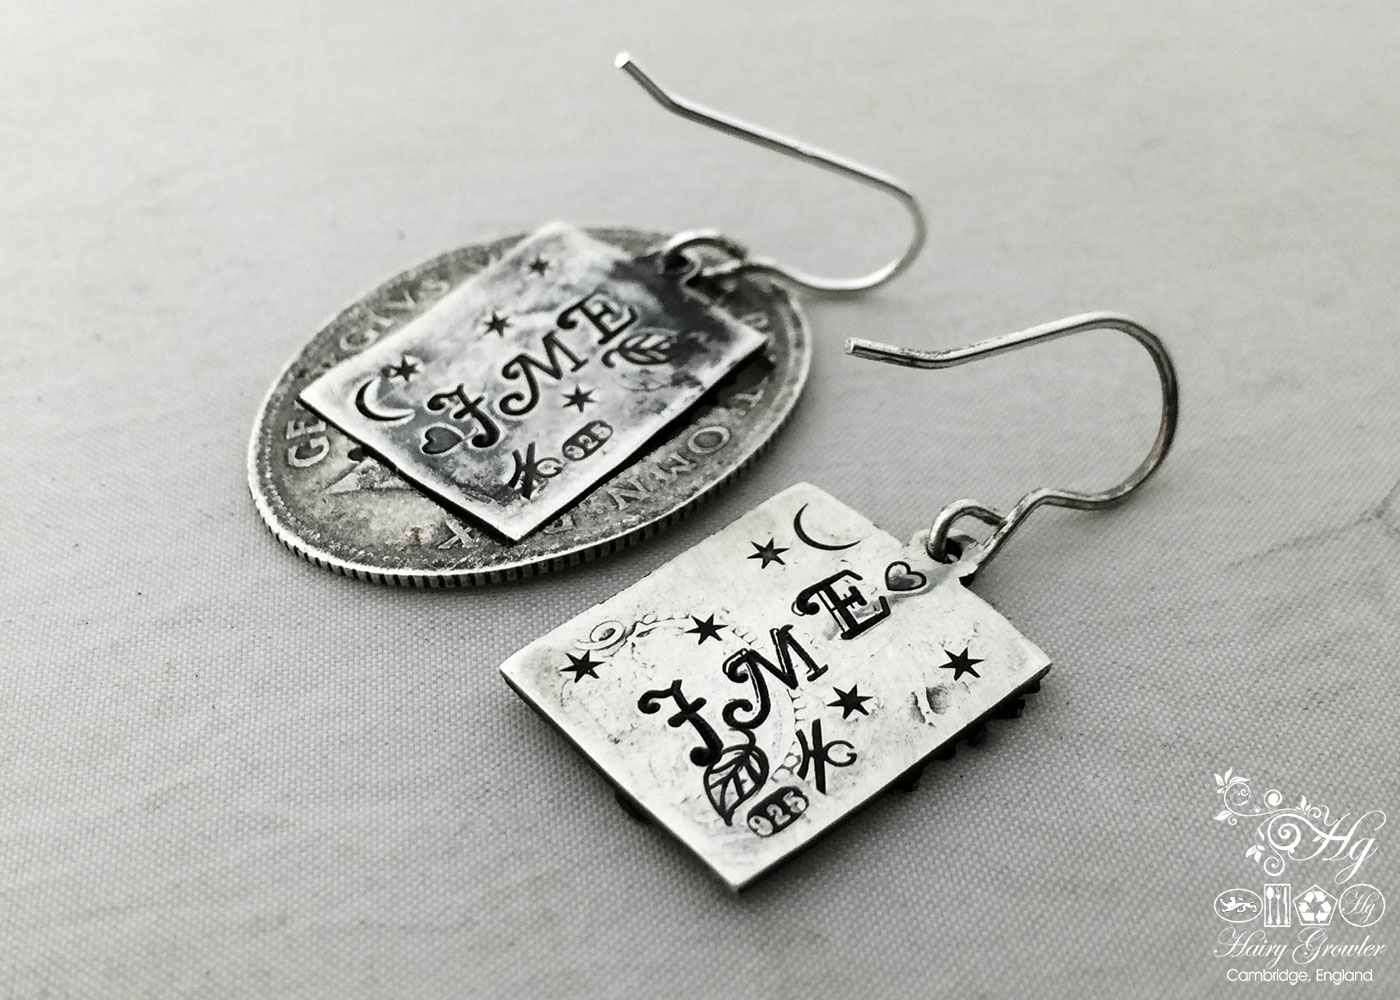 handcrafted and recycled silver Georgian shilling tree-of-life earrings made in Cambridge